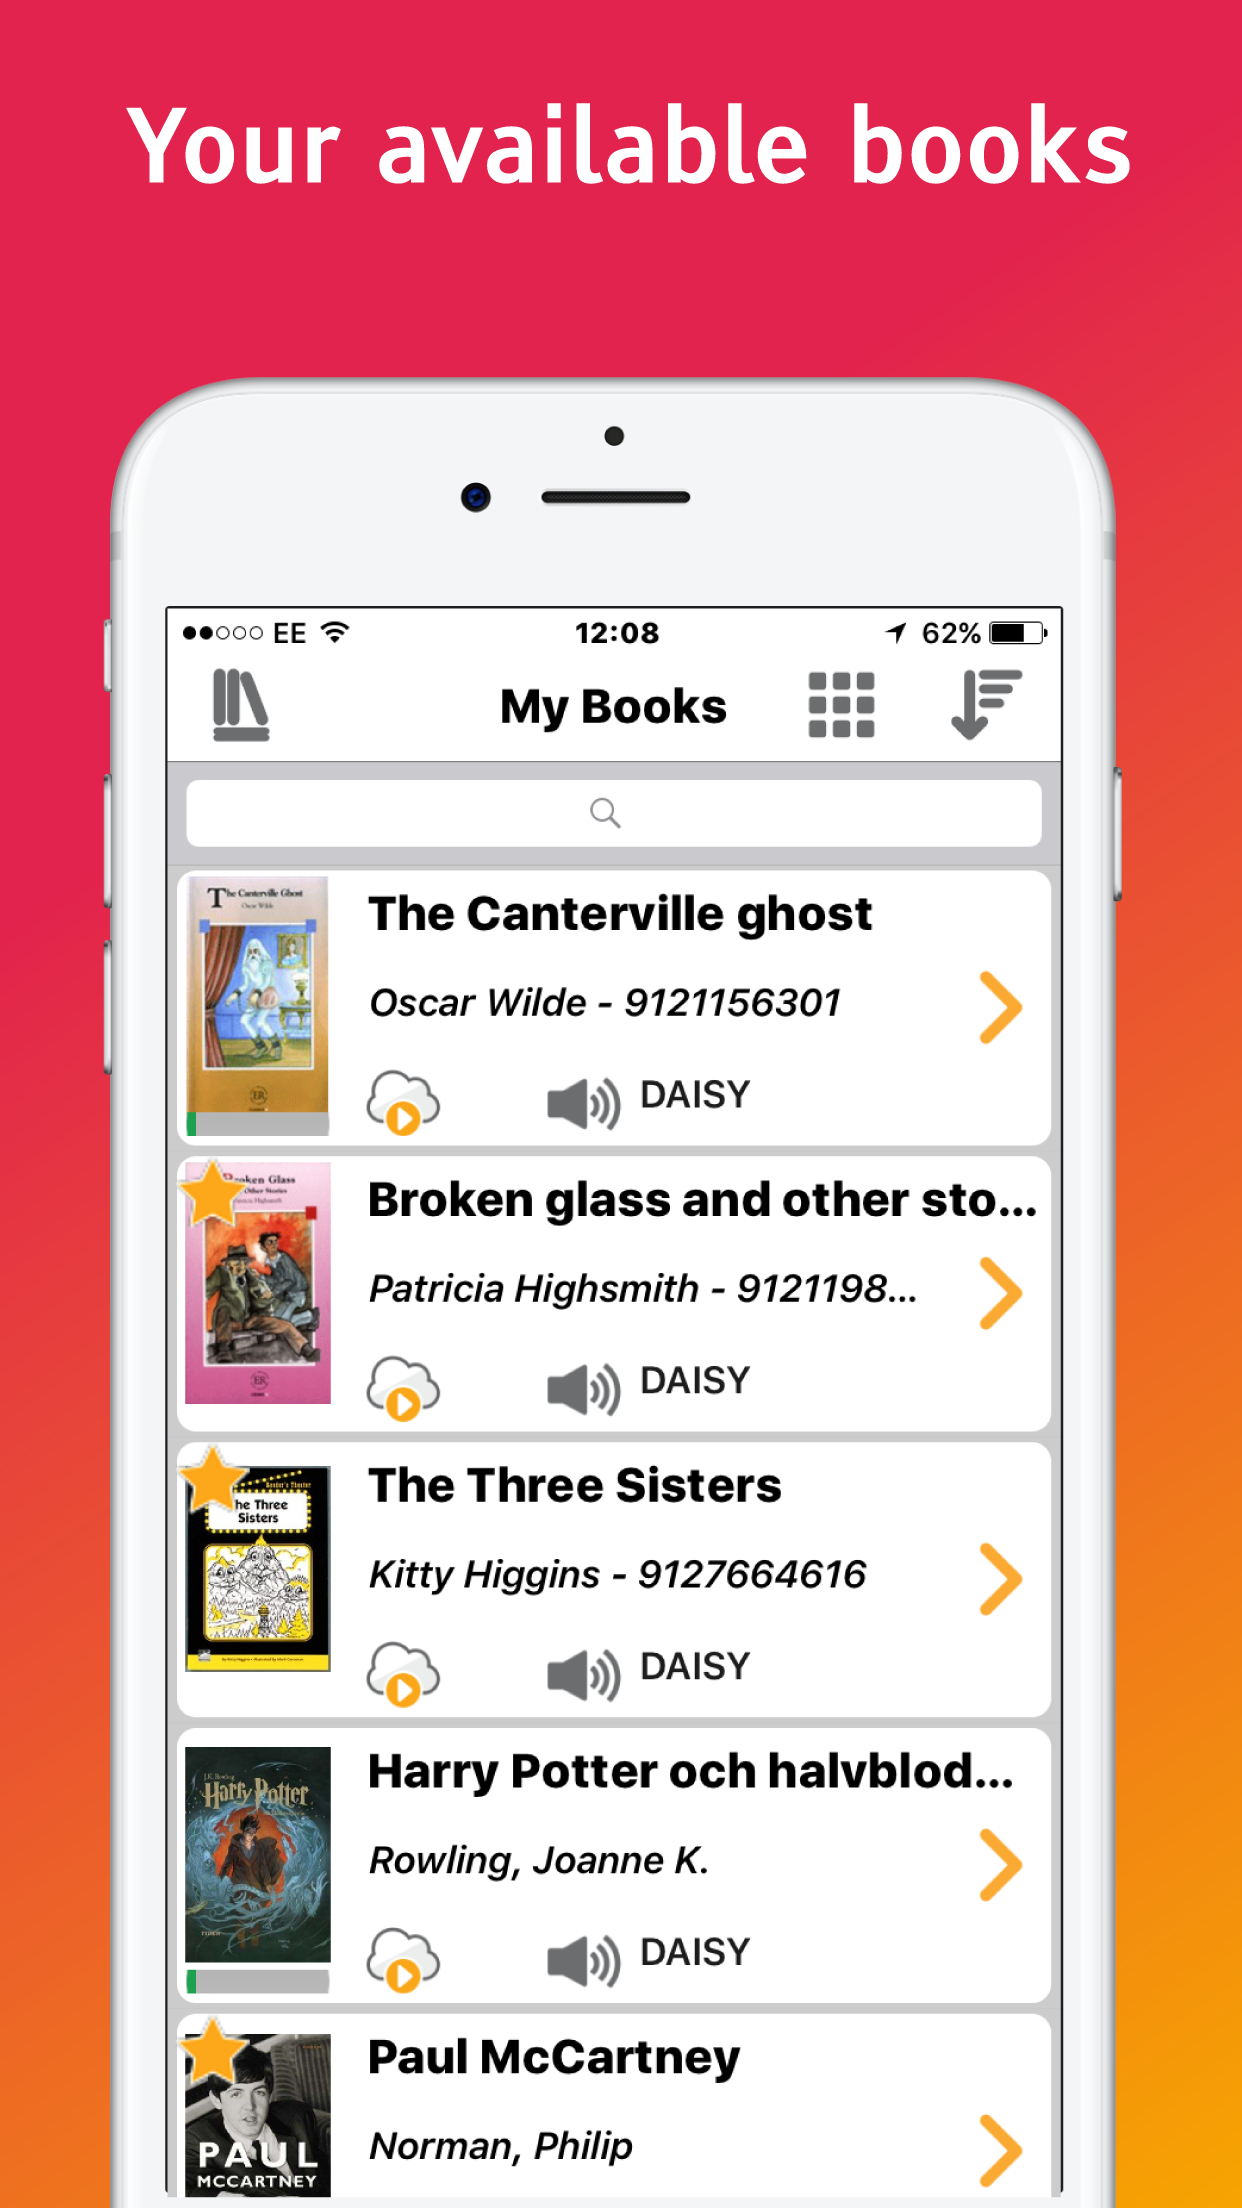 EasyReader - All your available books in one location